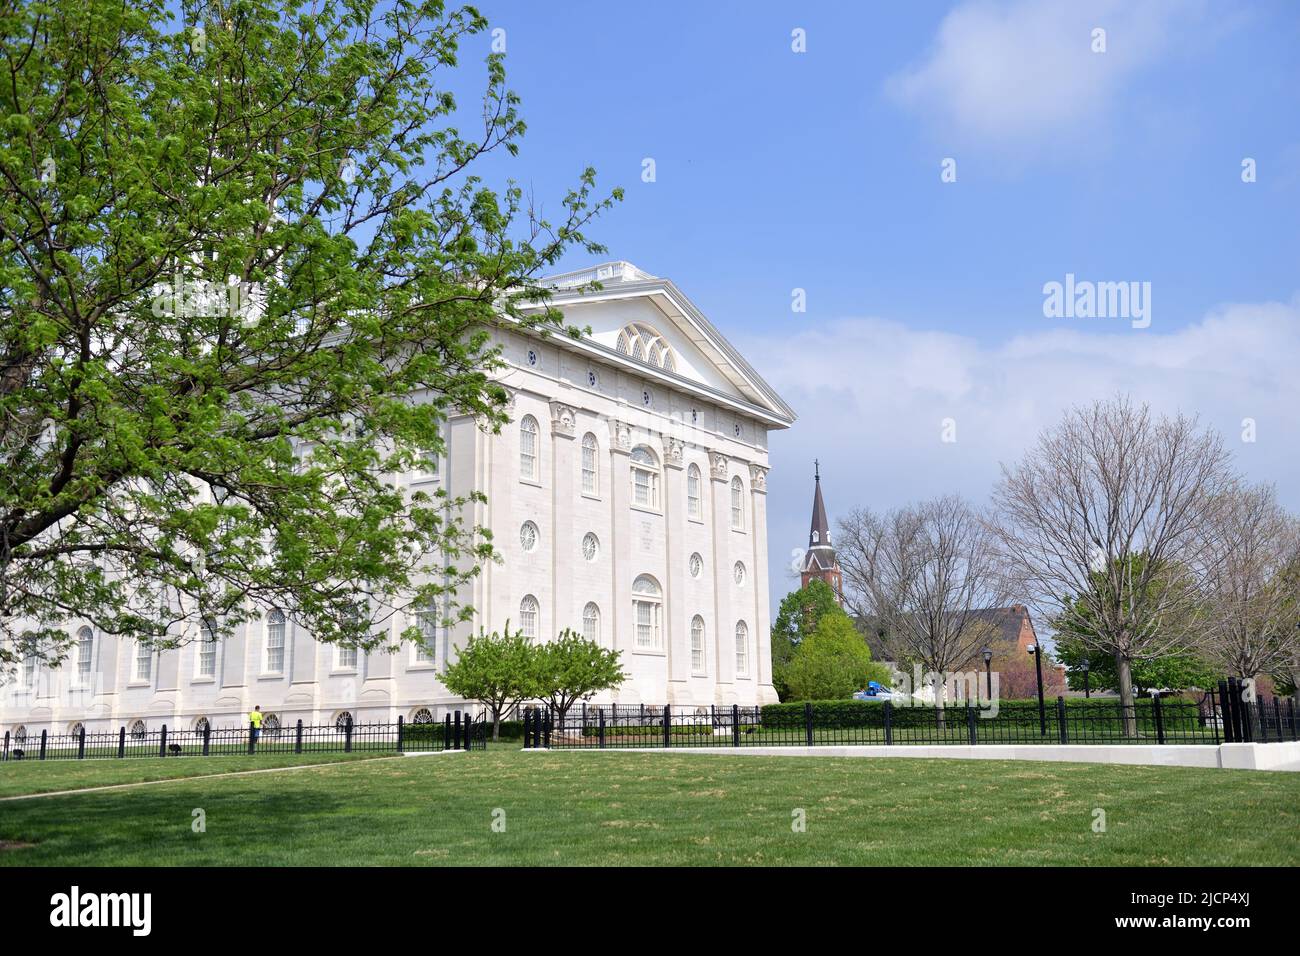 Nauvoo, Illinois, USA. The Nauvoo Illinois Temple, built in the Greek revival architectural style, was dedicated in 2002. Stock Photo